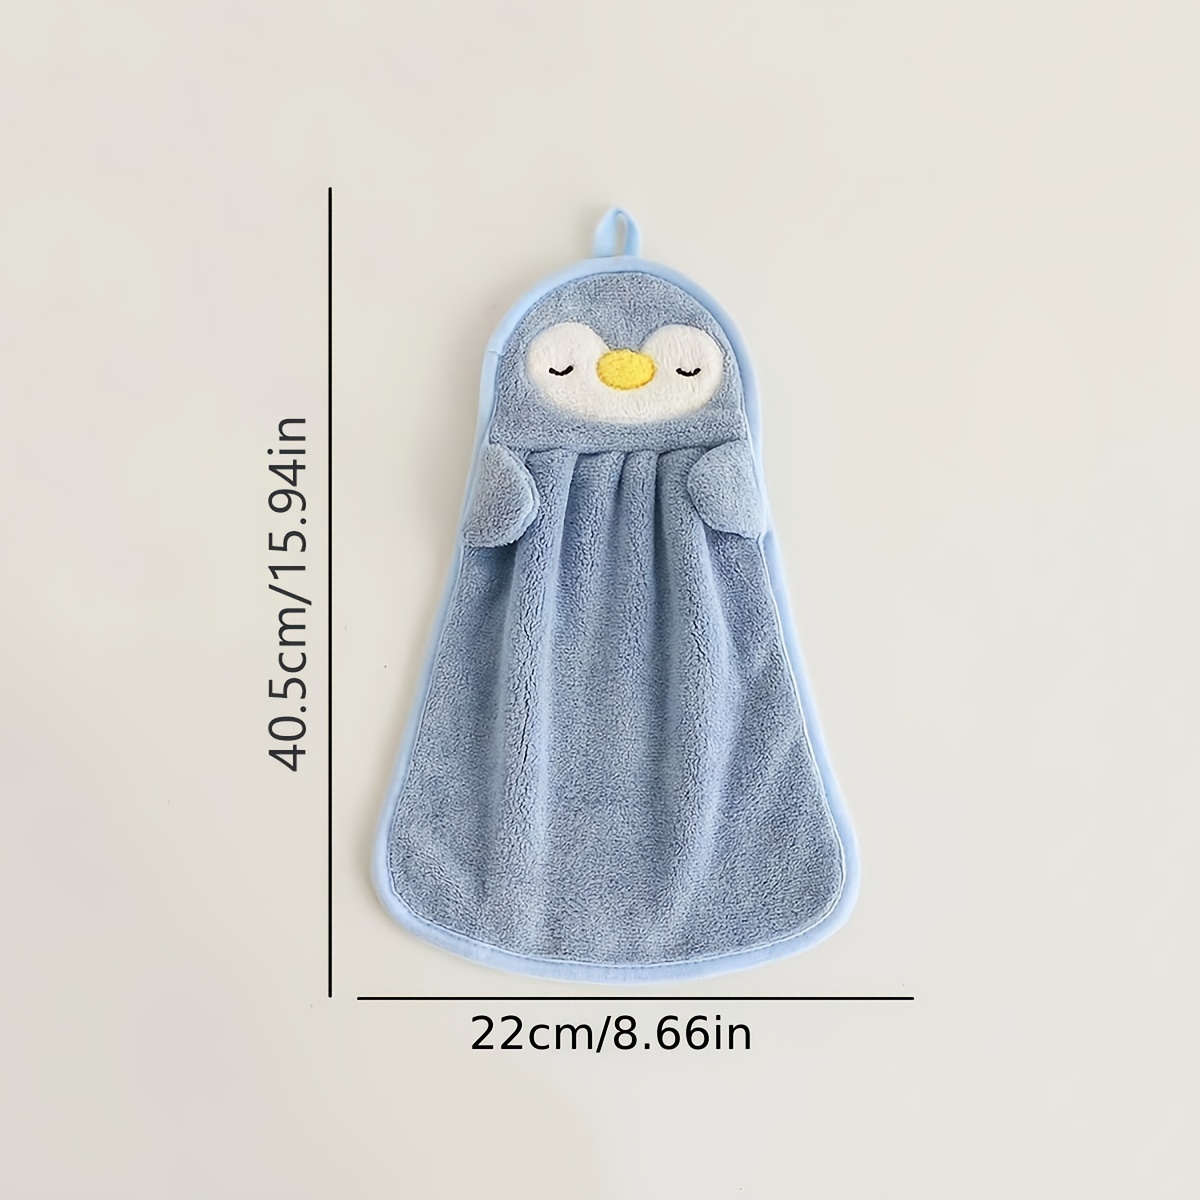 1pc cute cartoon fingertip towel hanging towel for wiping hands coral fleece kitchen rag soft absorbent towel for bathroom bathroom supplies home decor spring festival new year gift tea towel bathroom accessory